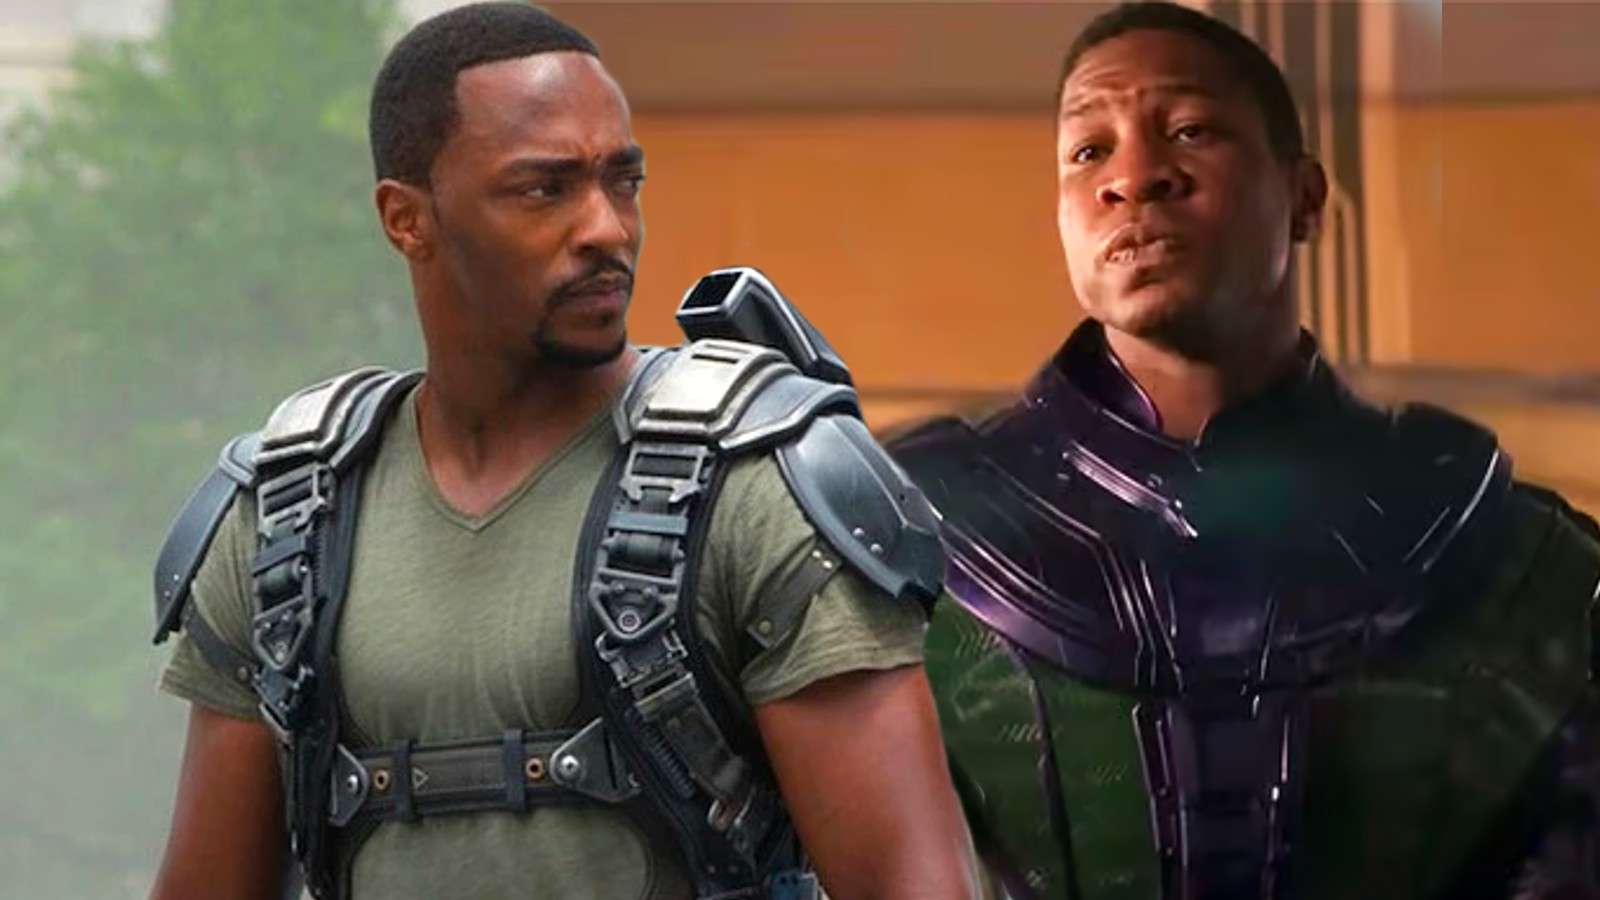 Anthony Mackie in The Winter Soldier and Jonathan Majors in Ant-Man 3